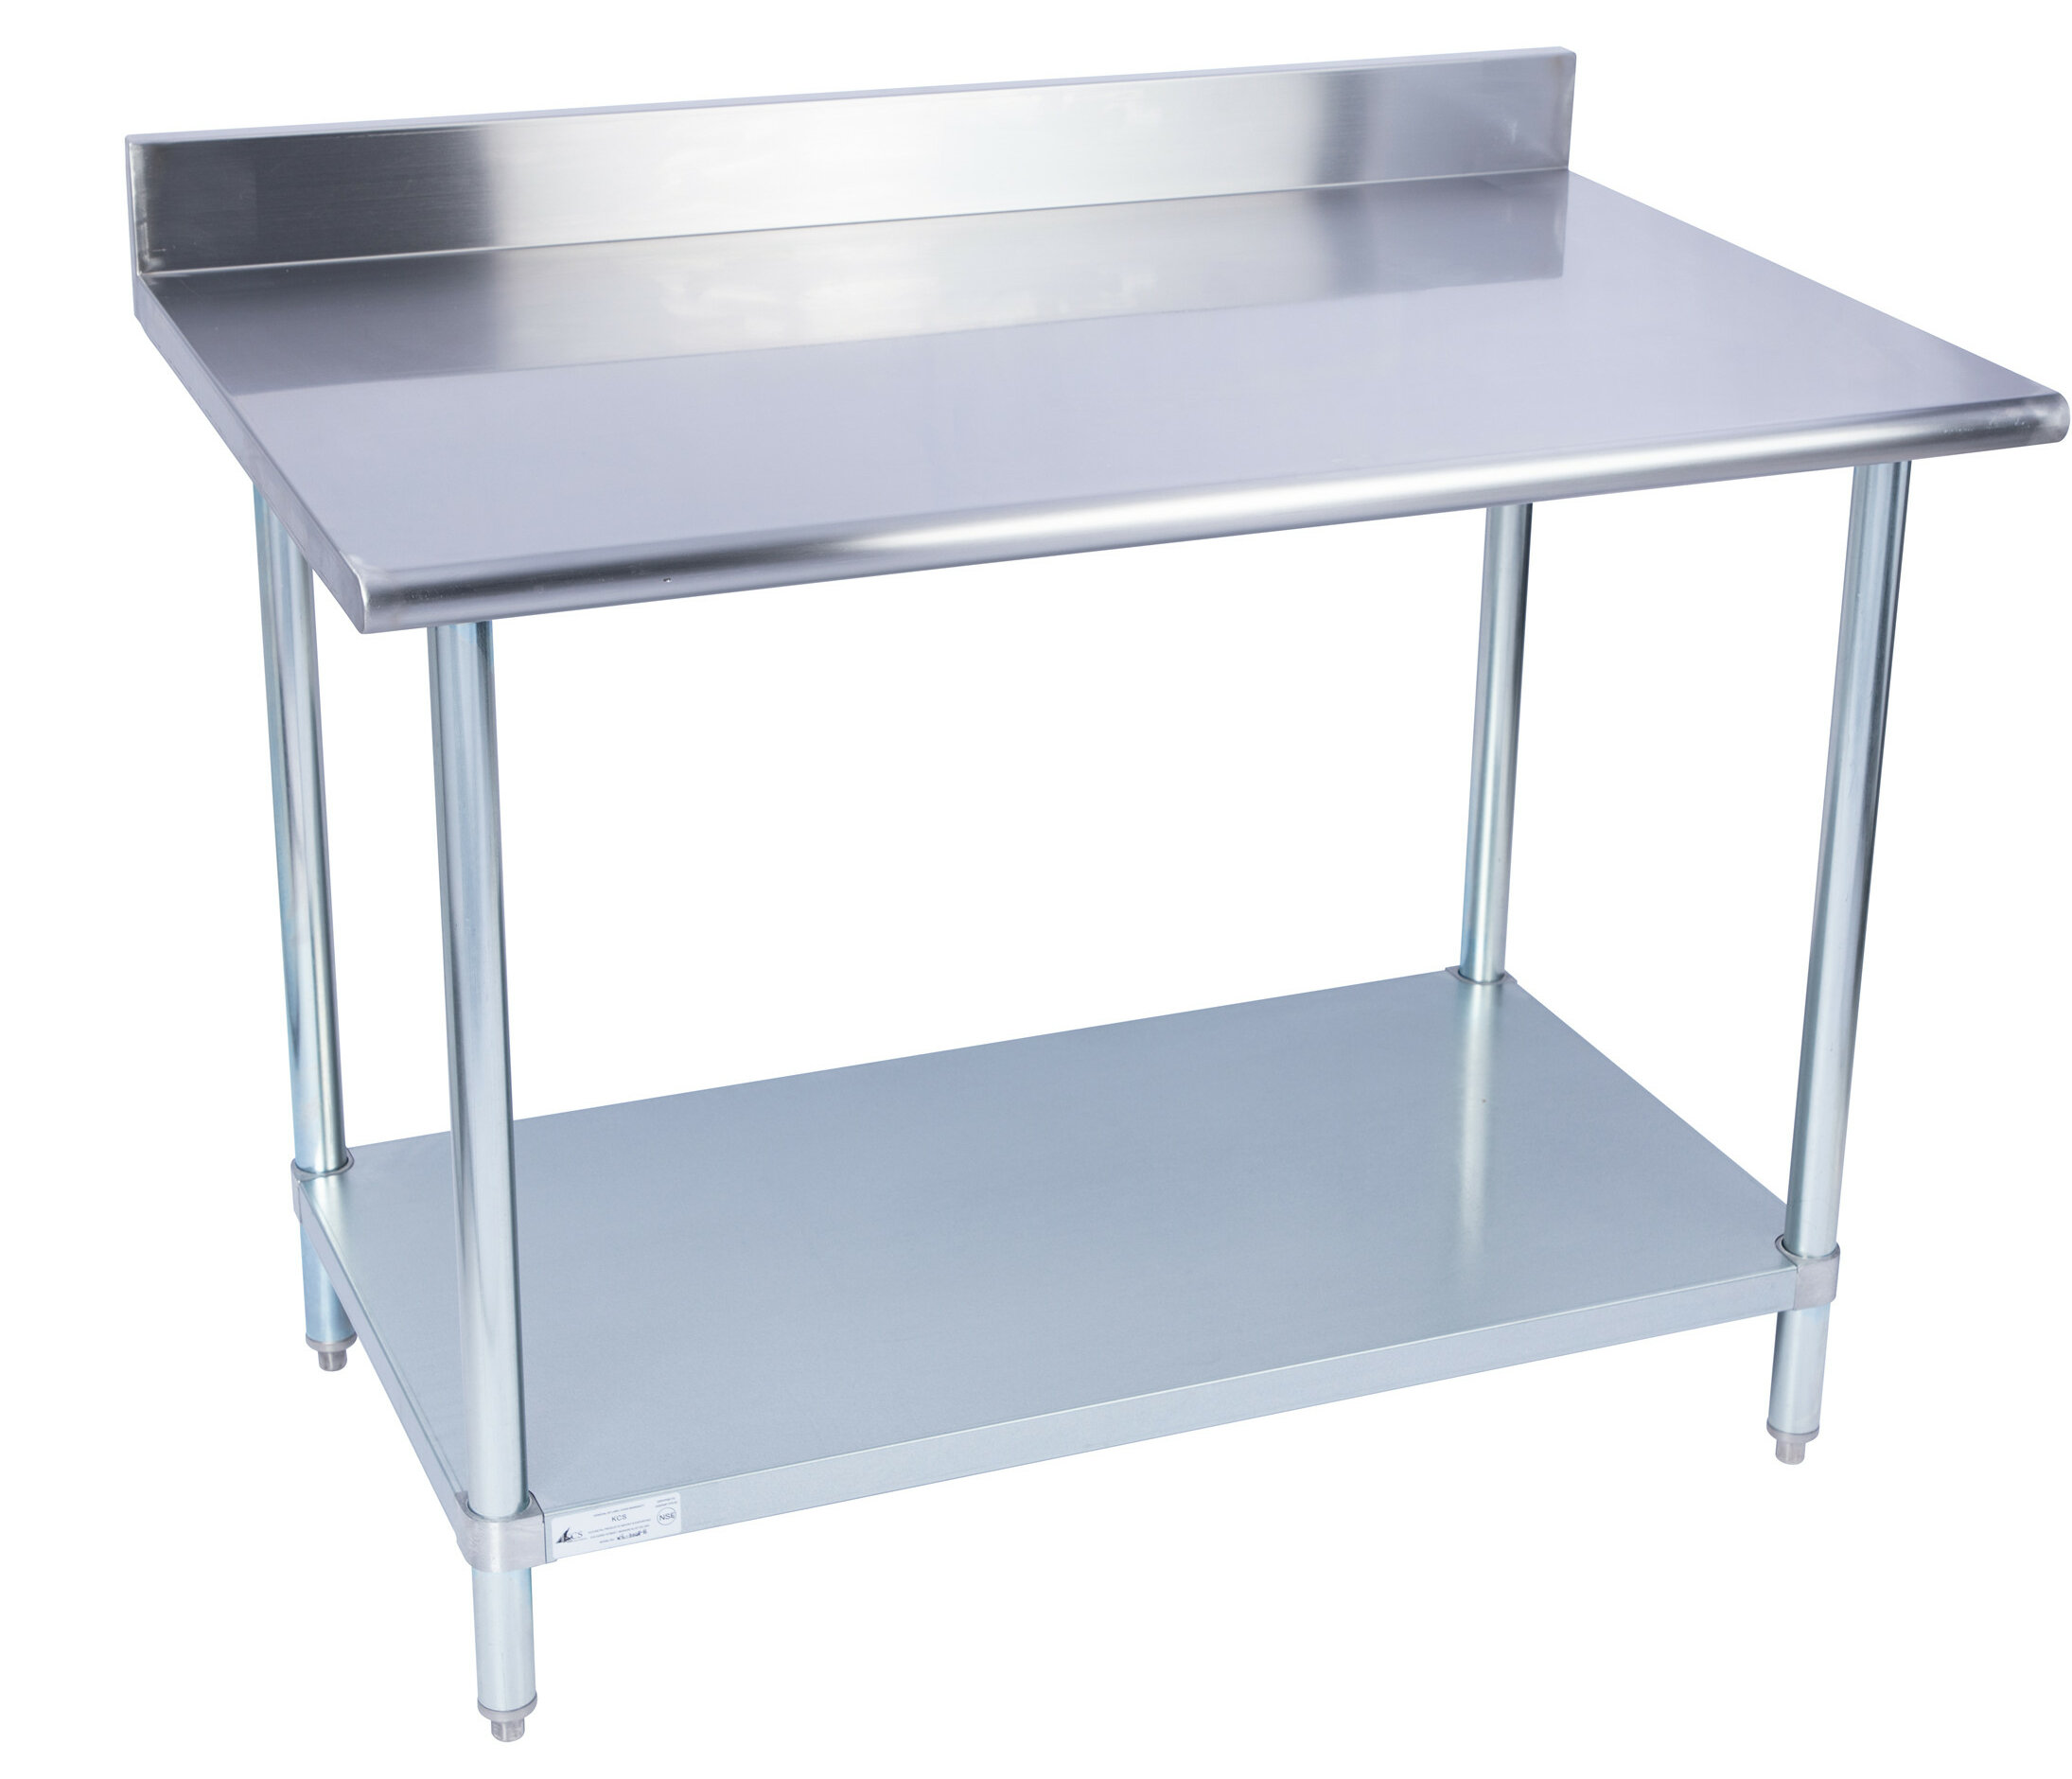 Profeeshaw Stainless Steel Prep Table 30×60 Inch NSF Commercial Work Table with Undershelf for Kitchen Restaurant 